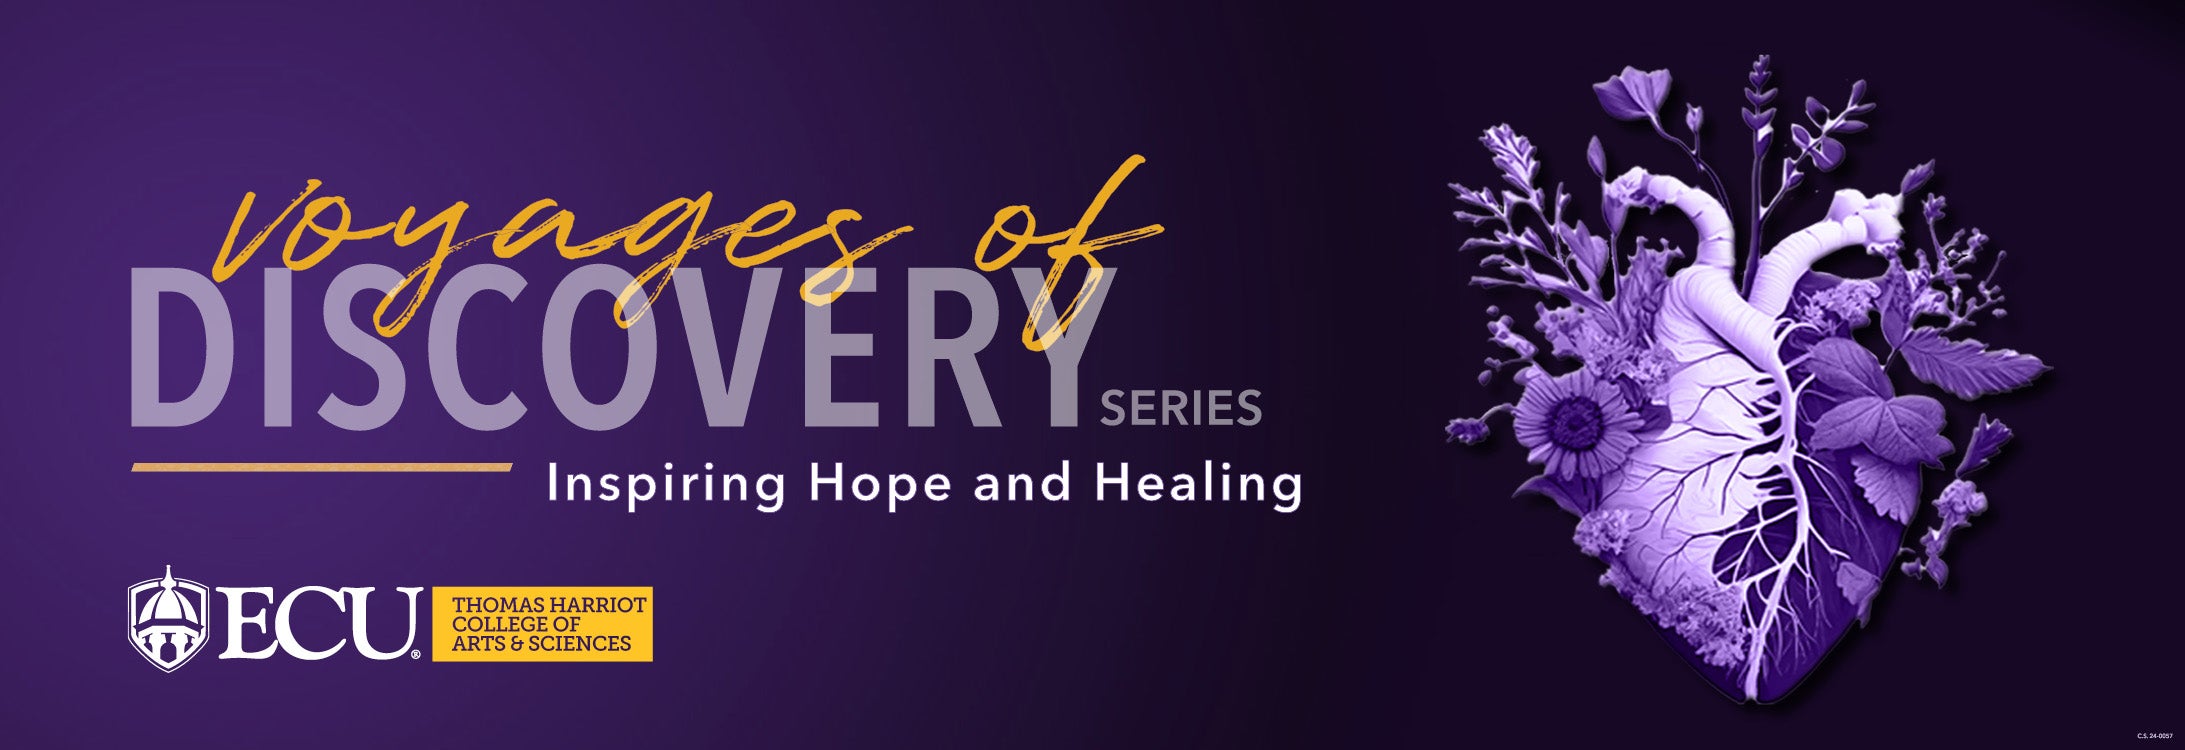 This year's Voyages of Discovery Series will feature an accomplished actor and an Olympic gymnast who will address the theme of inspiring hope and healing.